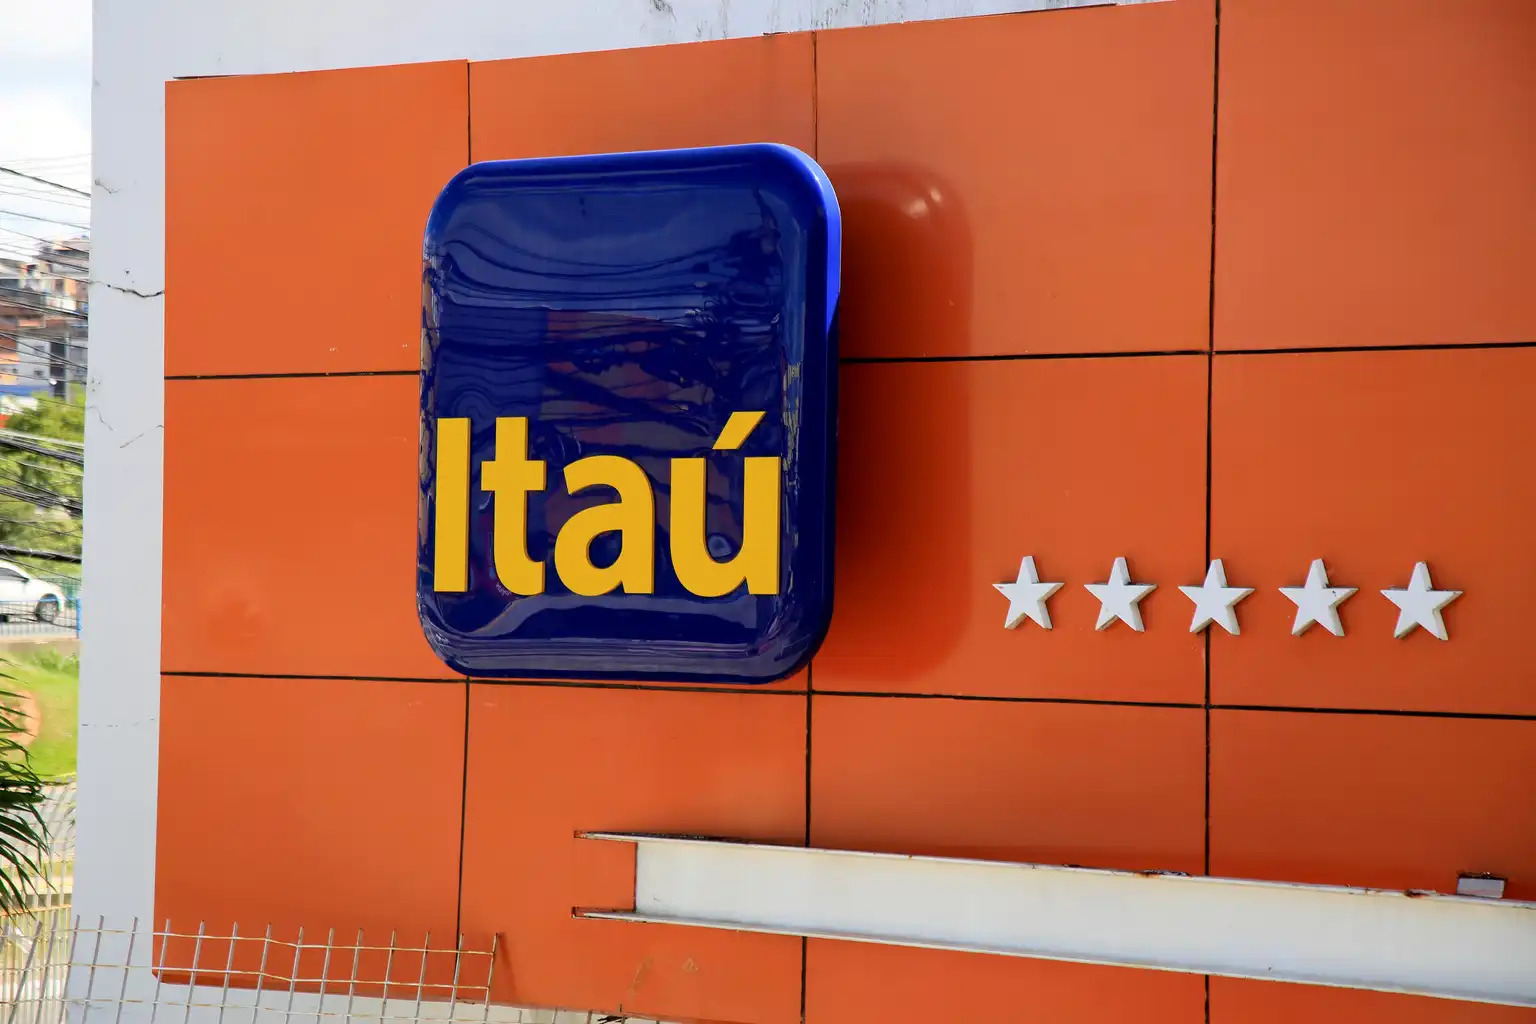 16 Intriguing Facts About Itaú Unibanco - Facts.net